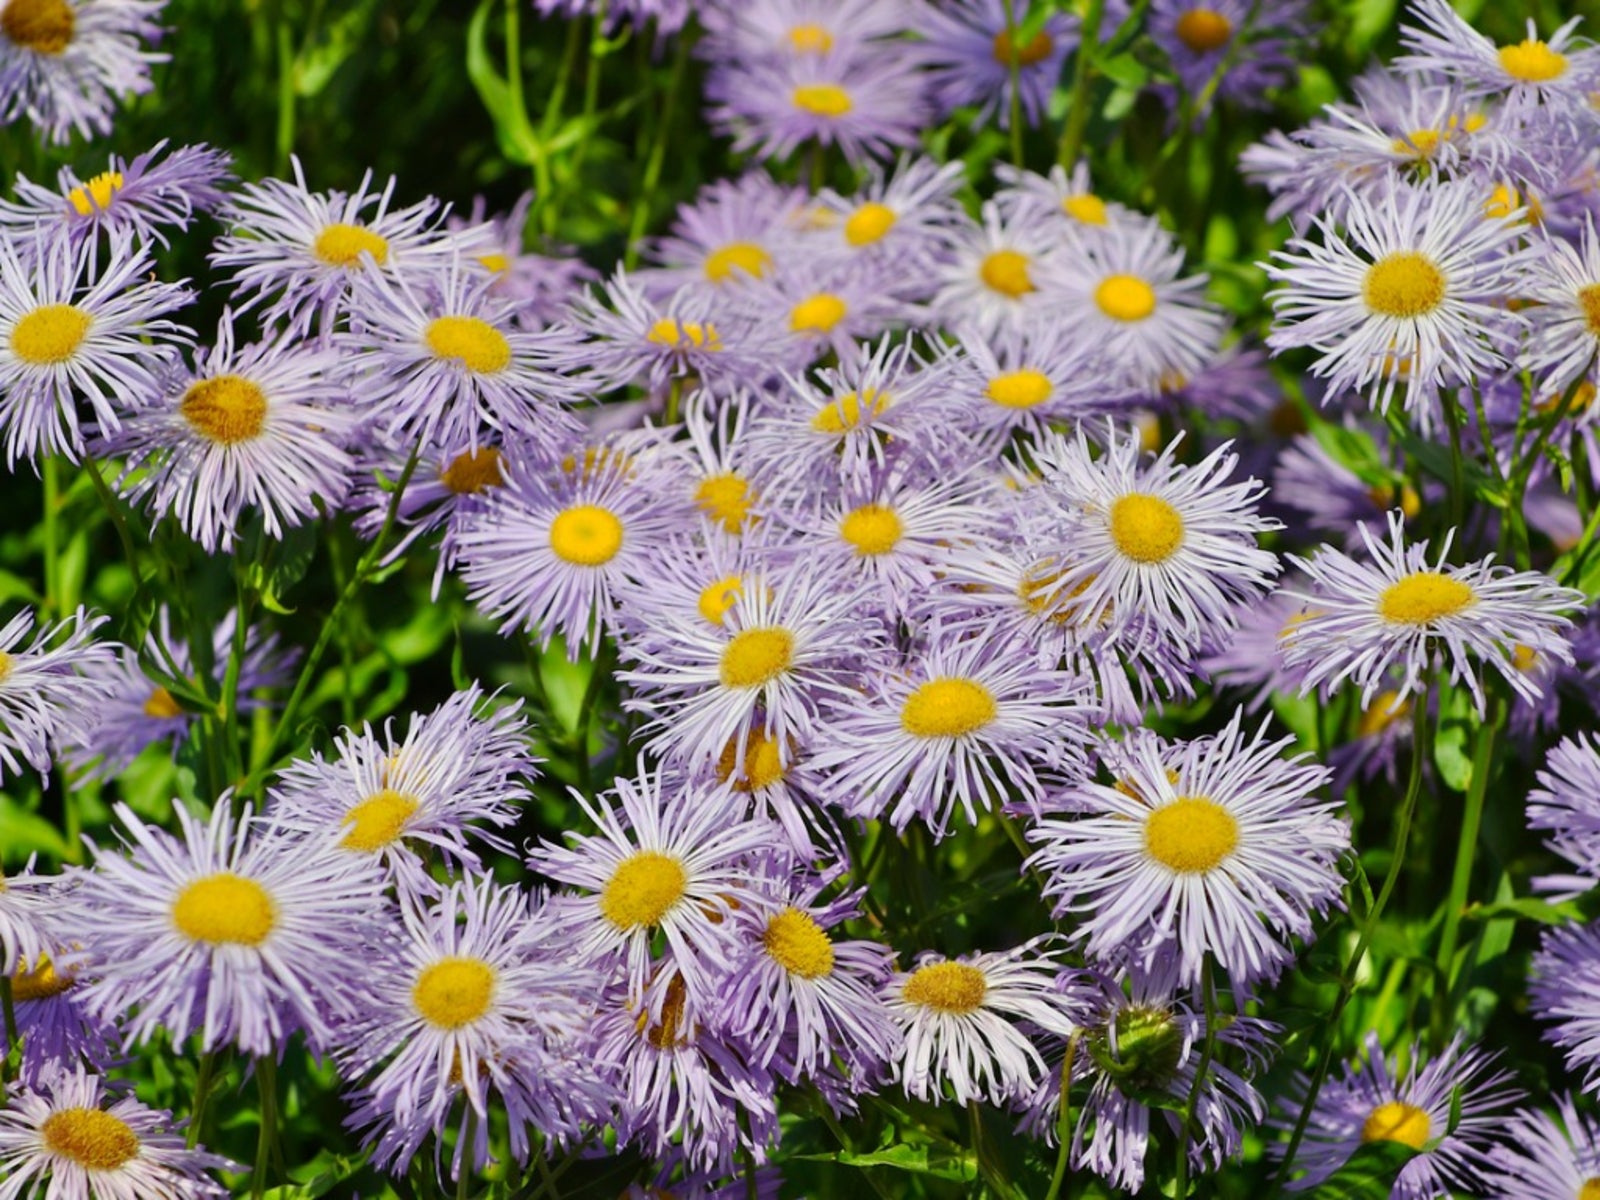 Fleabane Daisy Growing - Learn About The Care Of Fleabane Wildflowers | Gardening Know How